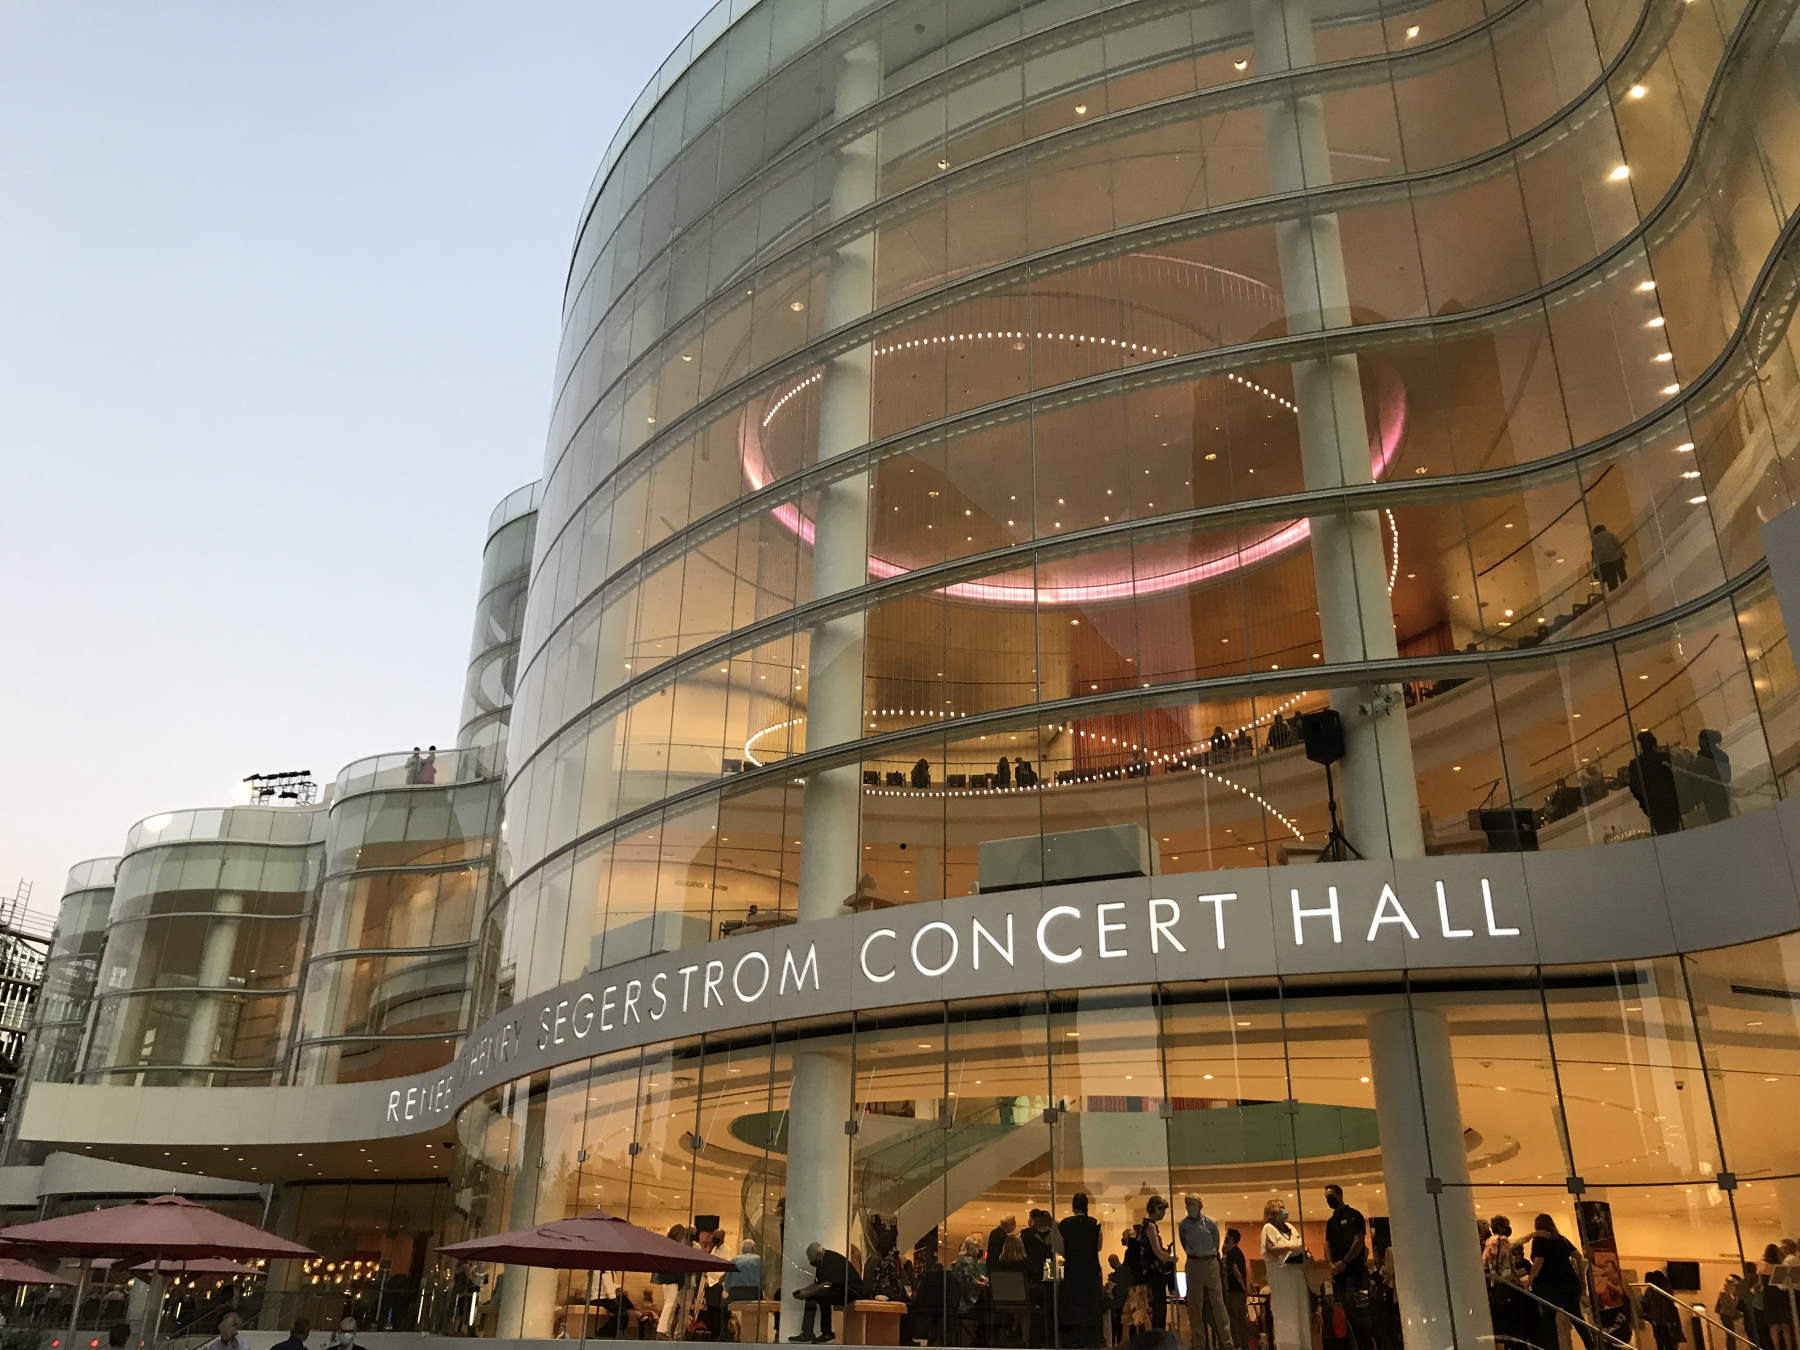 The Segerstrom Center for the Arts